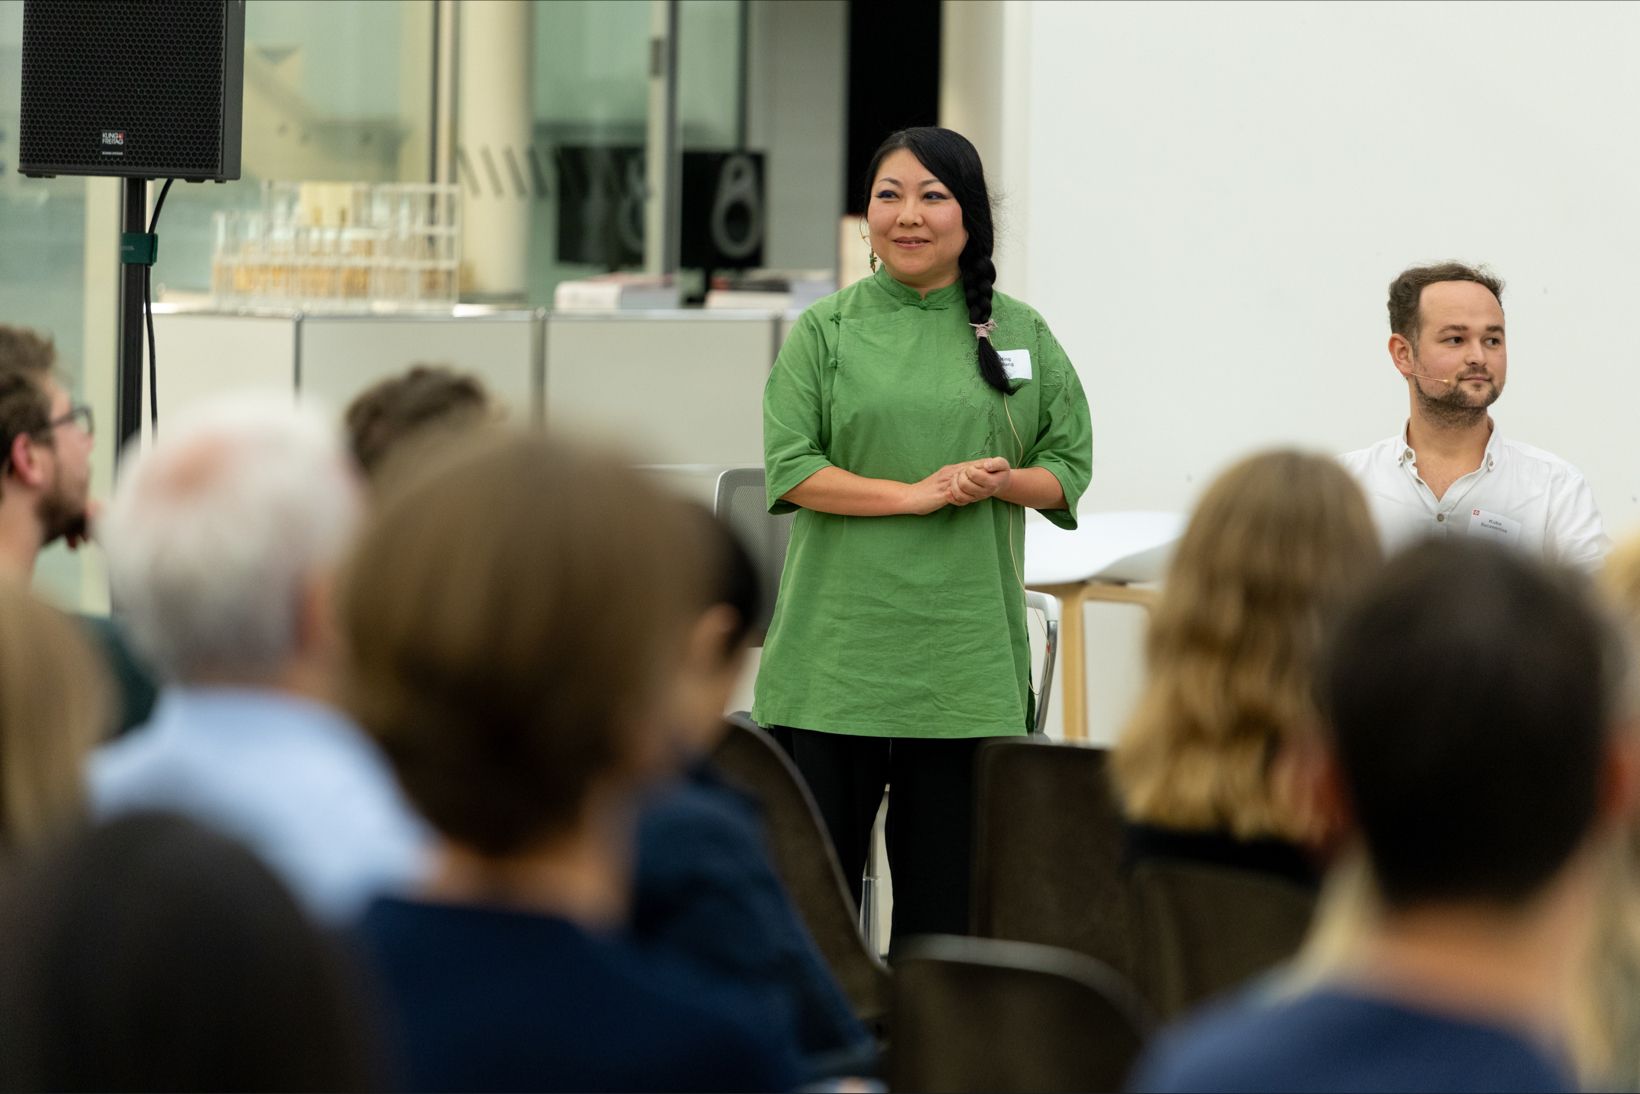 Dr. Ning Wang (UZH) speaking at the 20th anniversary of Swissnex, 26.10.2023; feminine-appearing person wearing a green top, black pants and a side braid placed over the left shoulder stands in front of a group of people and gives a lecture